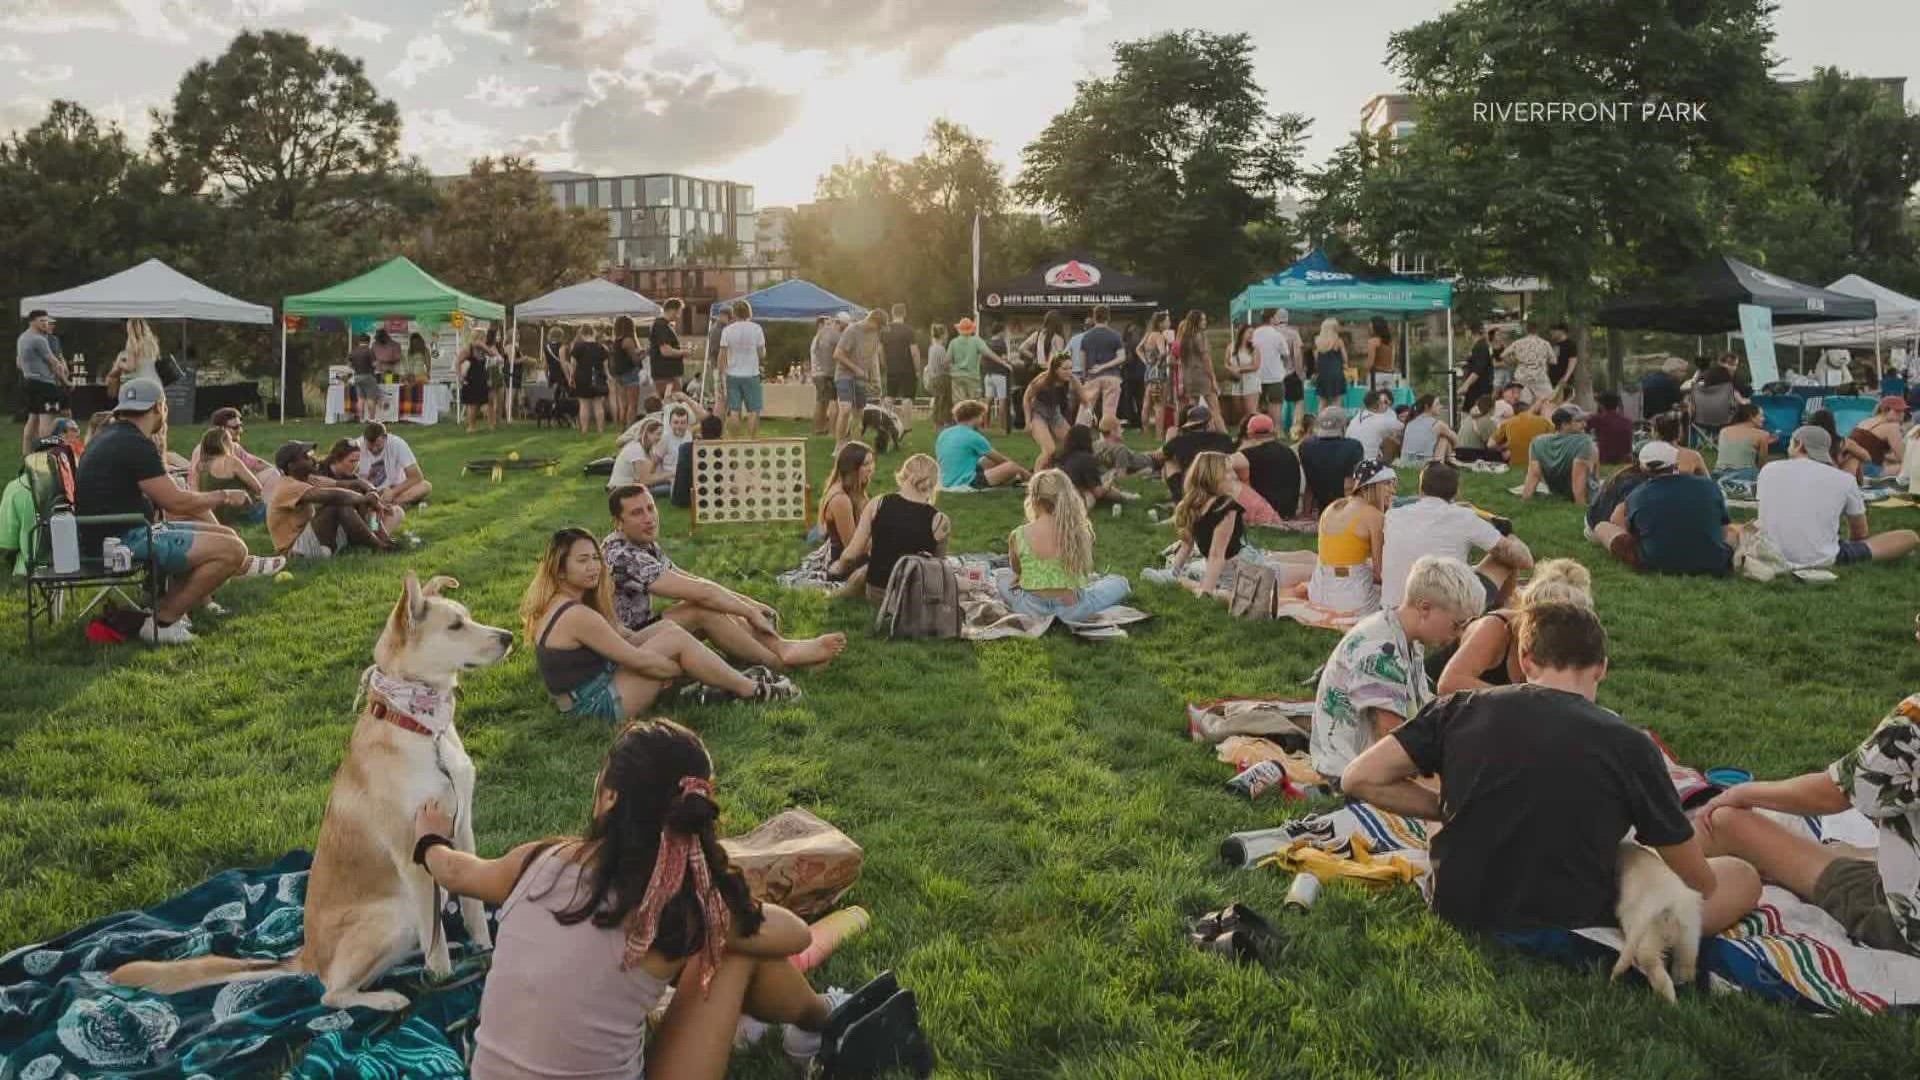 The concert series runs Thursday from 4 p.m. to 8 p.m. with live, local music, interactive art, artisan vendors, local food trucks, merchants and craft beer.